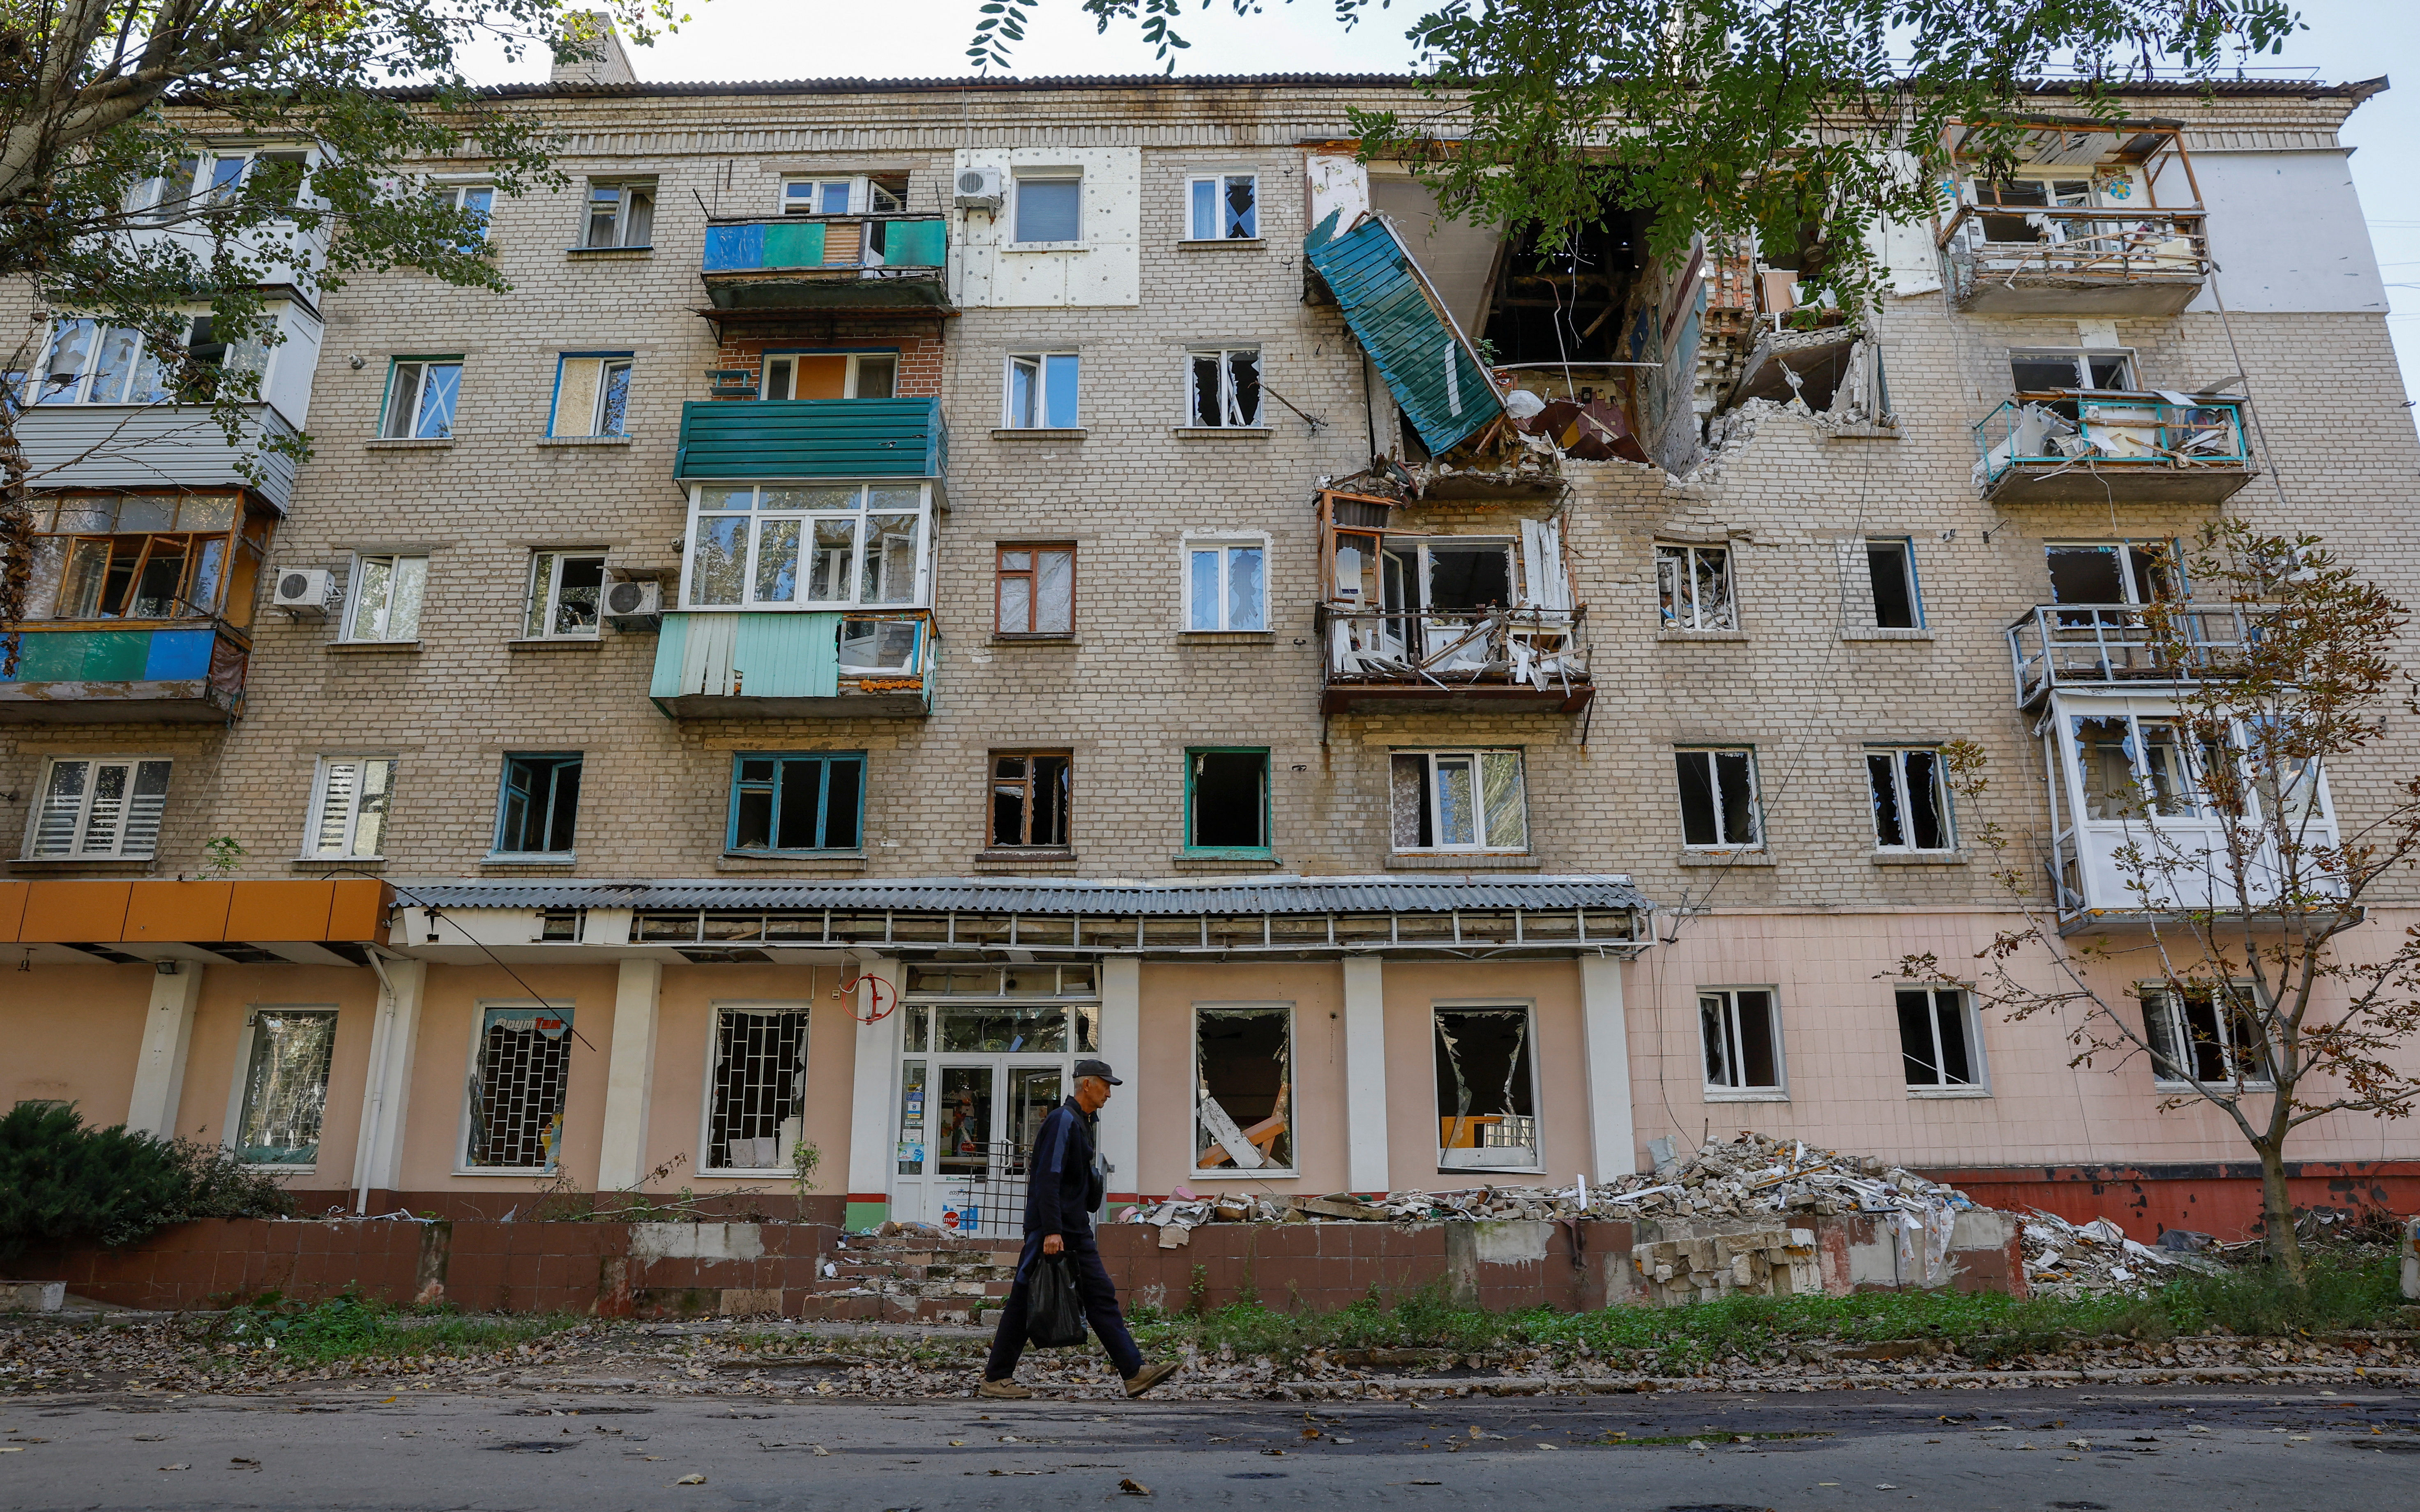 Lysychansk city in the course of Russia-Ukraine conflict in Luhansk Region